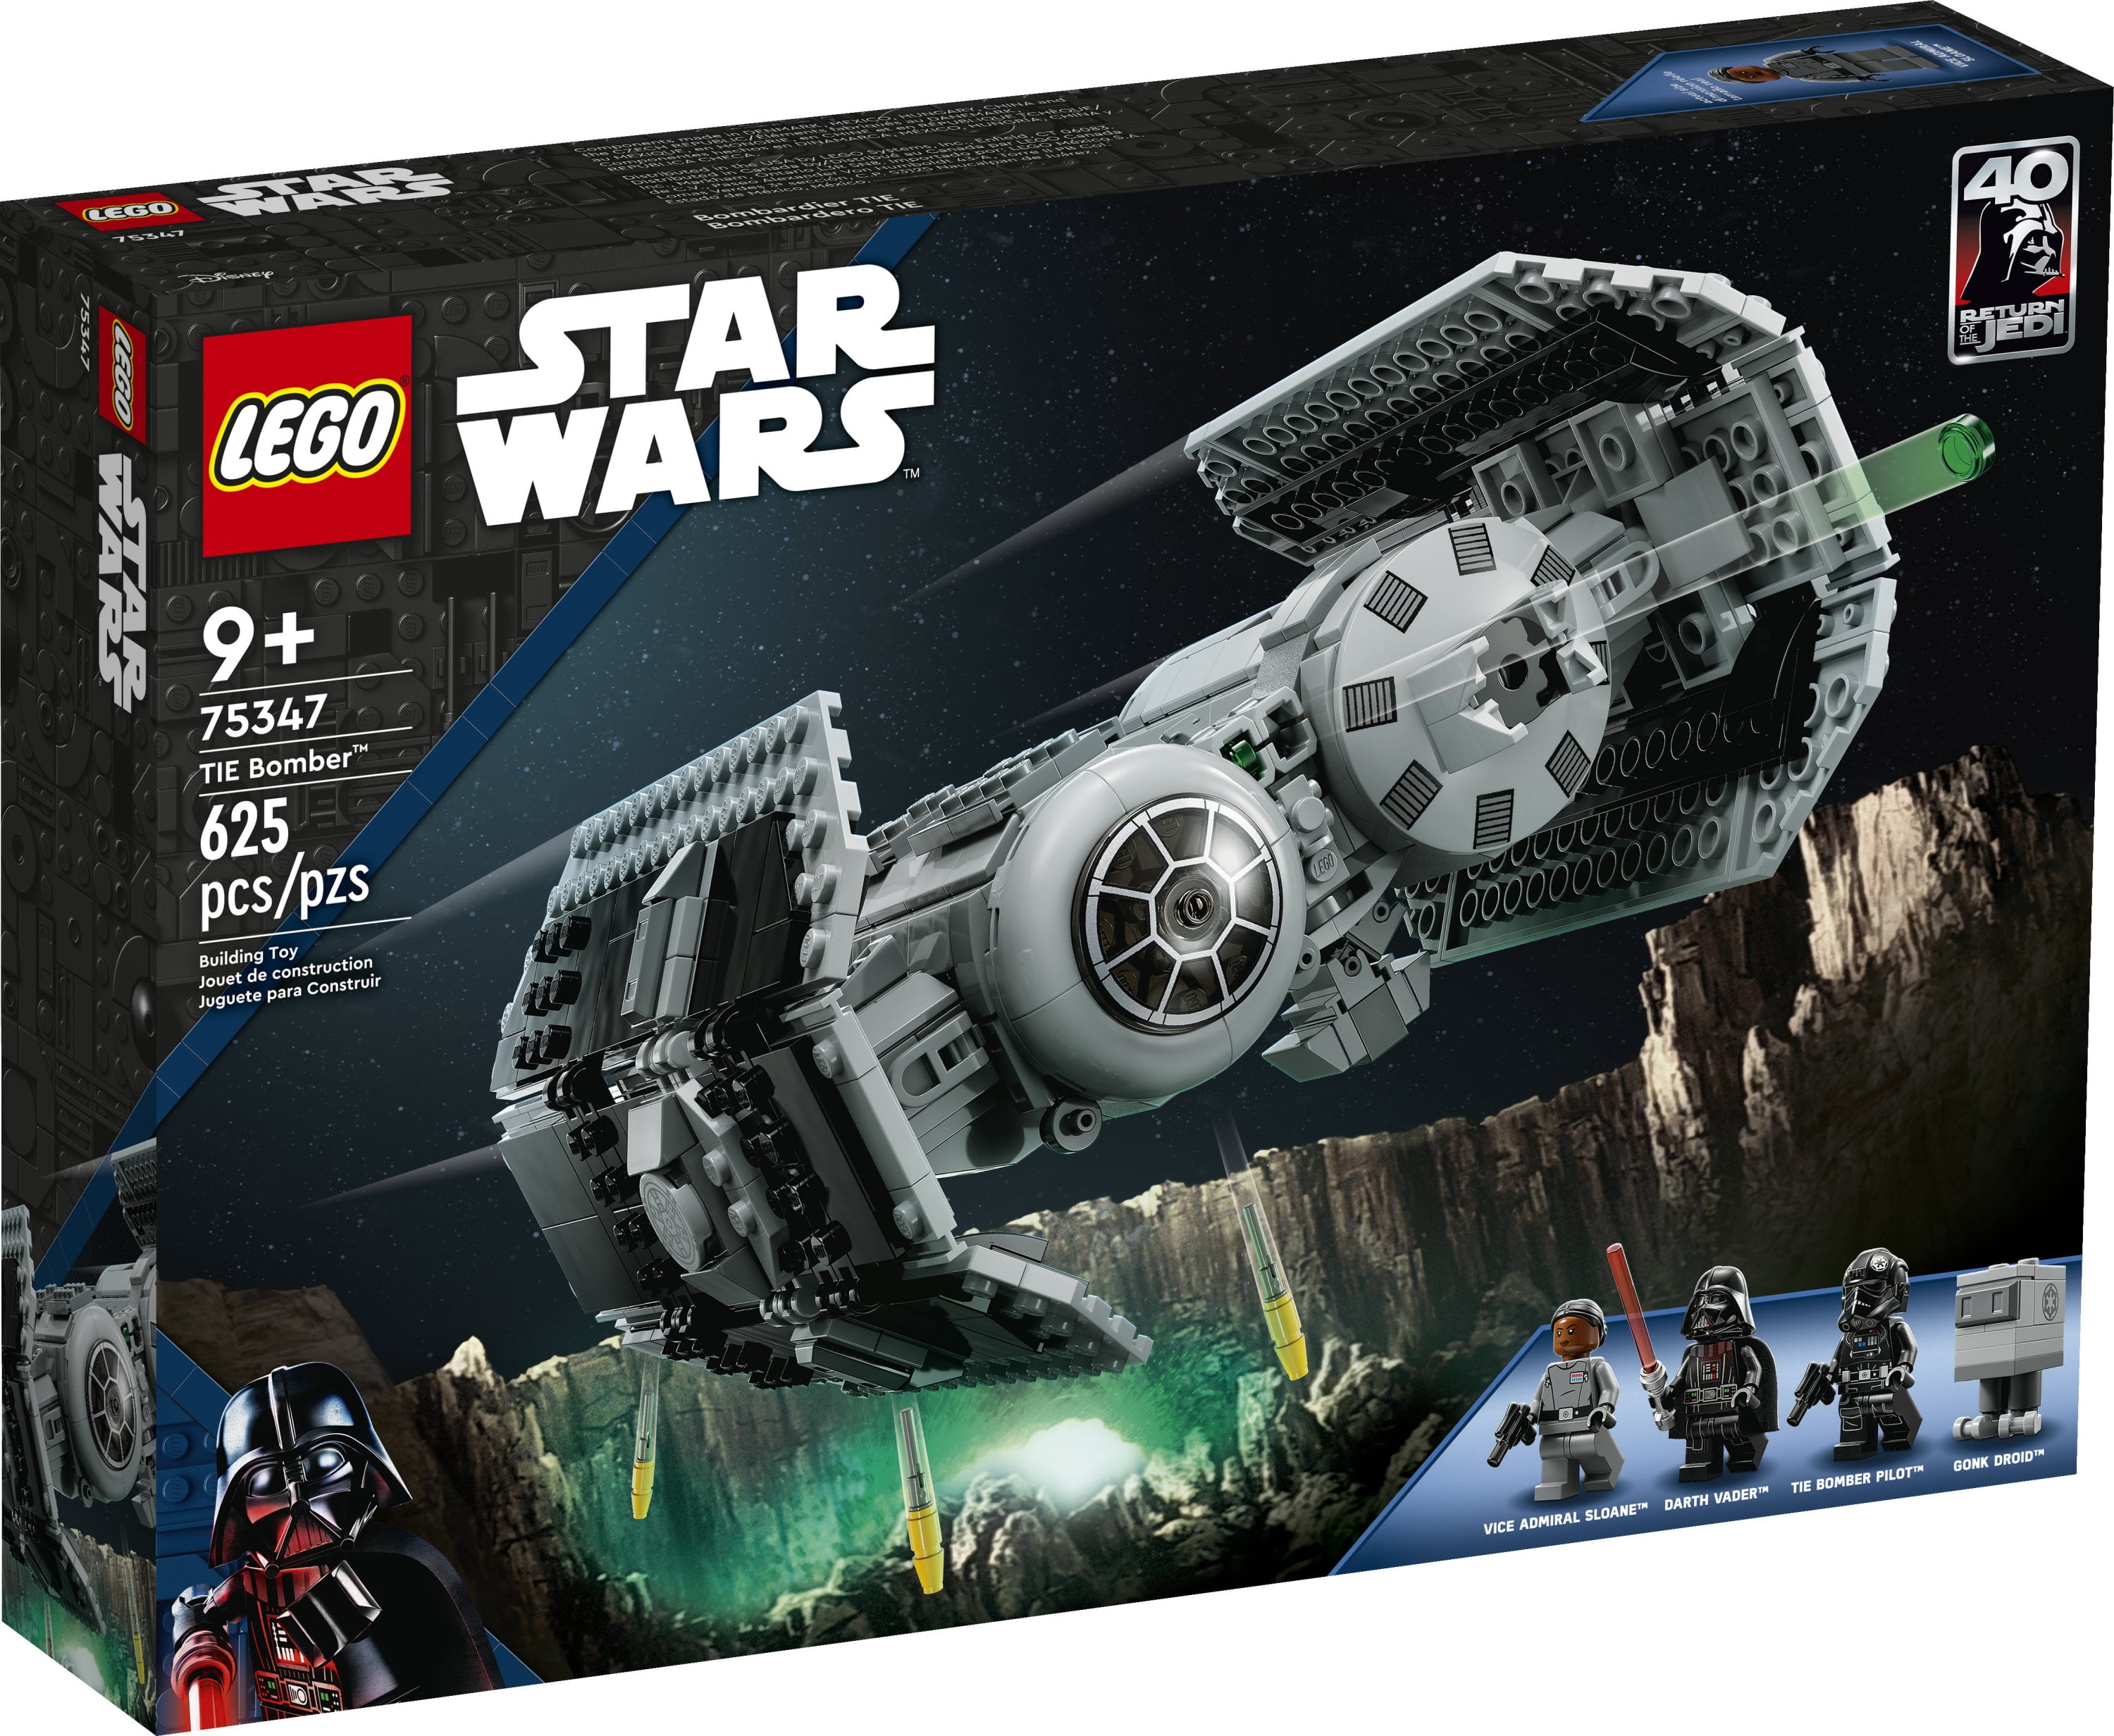 LEGO 75347 Star Wars TIE Bomb Model Kit with Darth Vader Mini Figure with  Lightsaber and Gonk Droid & 75344 Star Wars Boba Fetts Starship -  Microfighter Set, Model from The Mandalorian